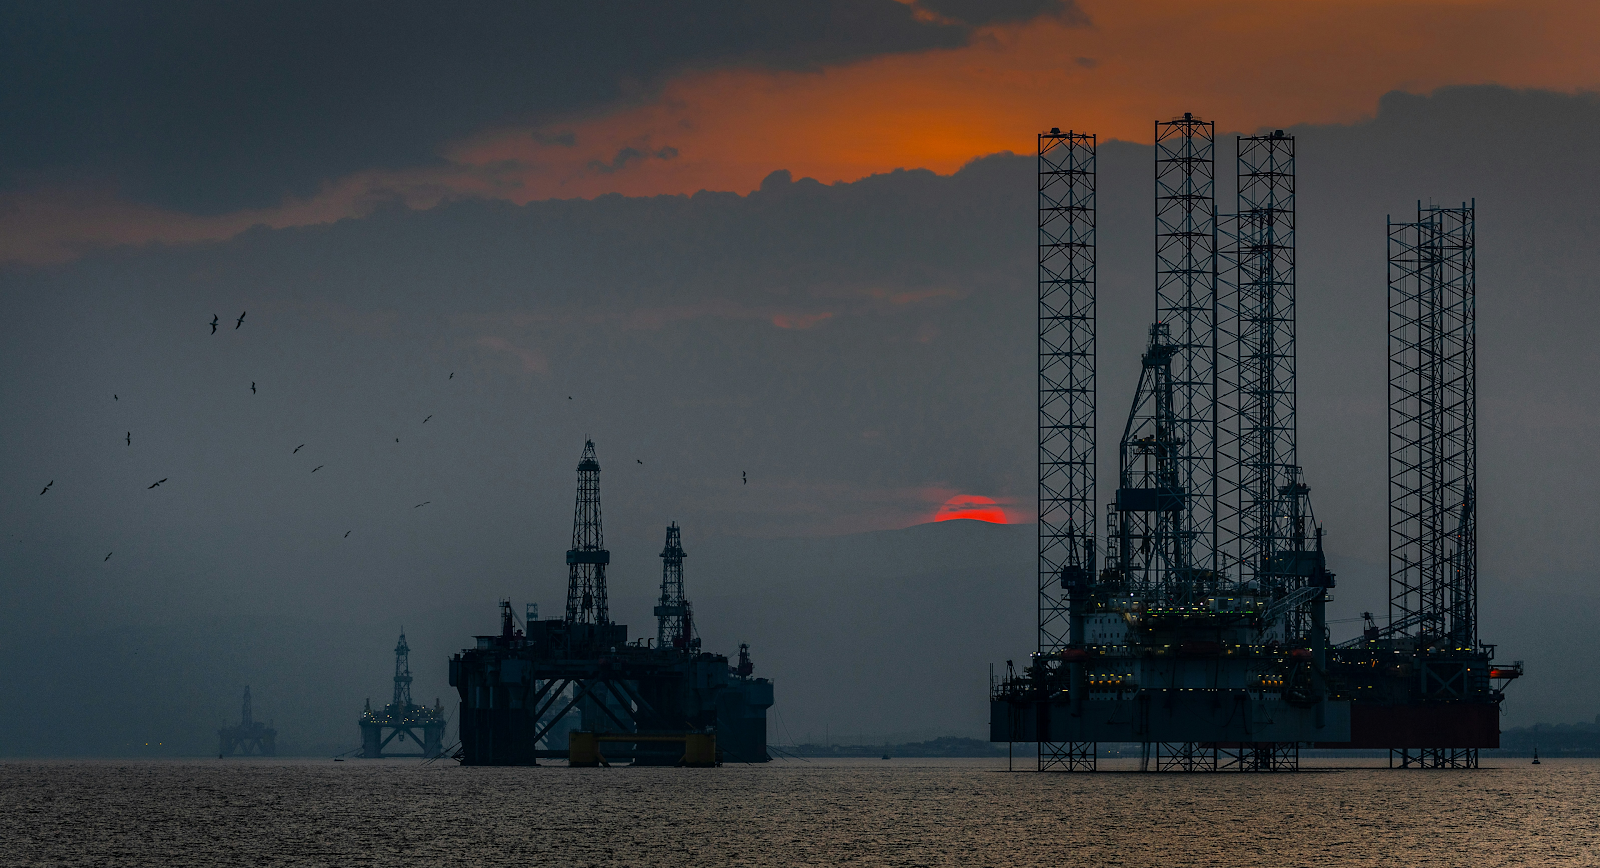 Oil rigs on the ocean at sunset